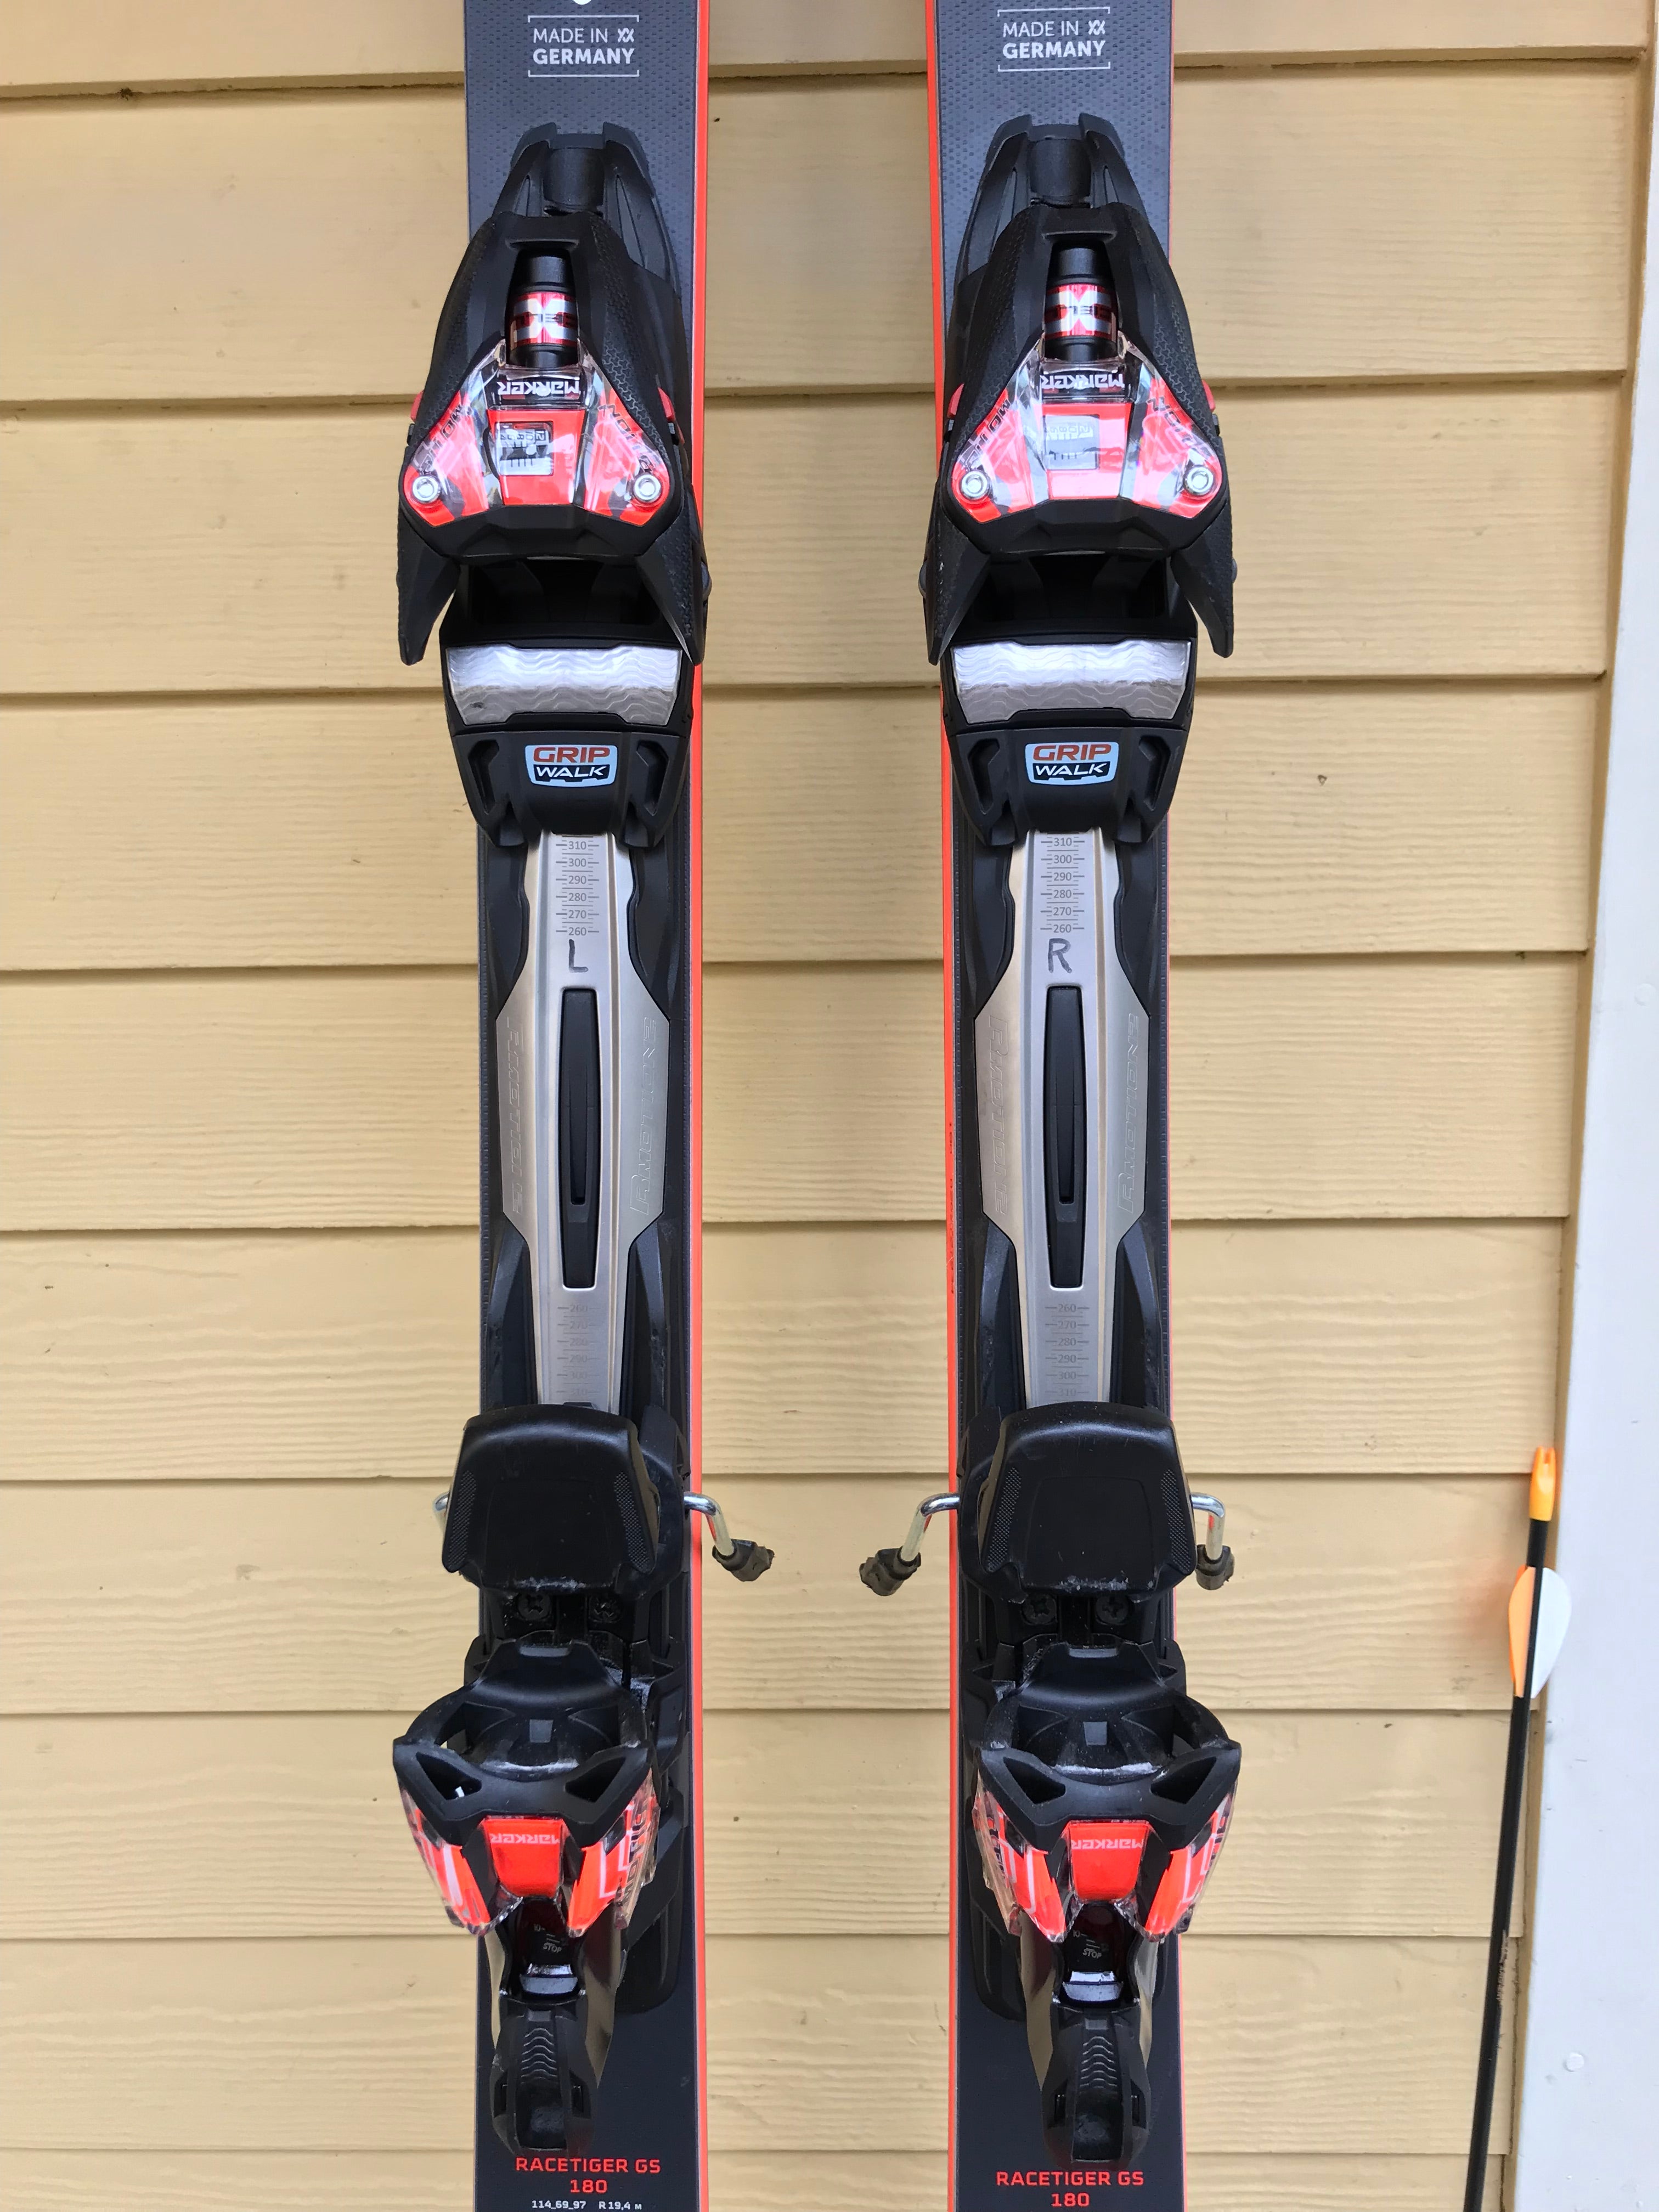 Lightly Used '21-'22 Volkl Racetiger GS Skis With Bindings Max Din